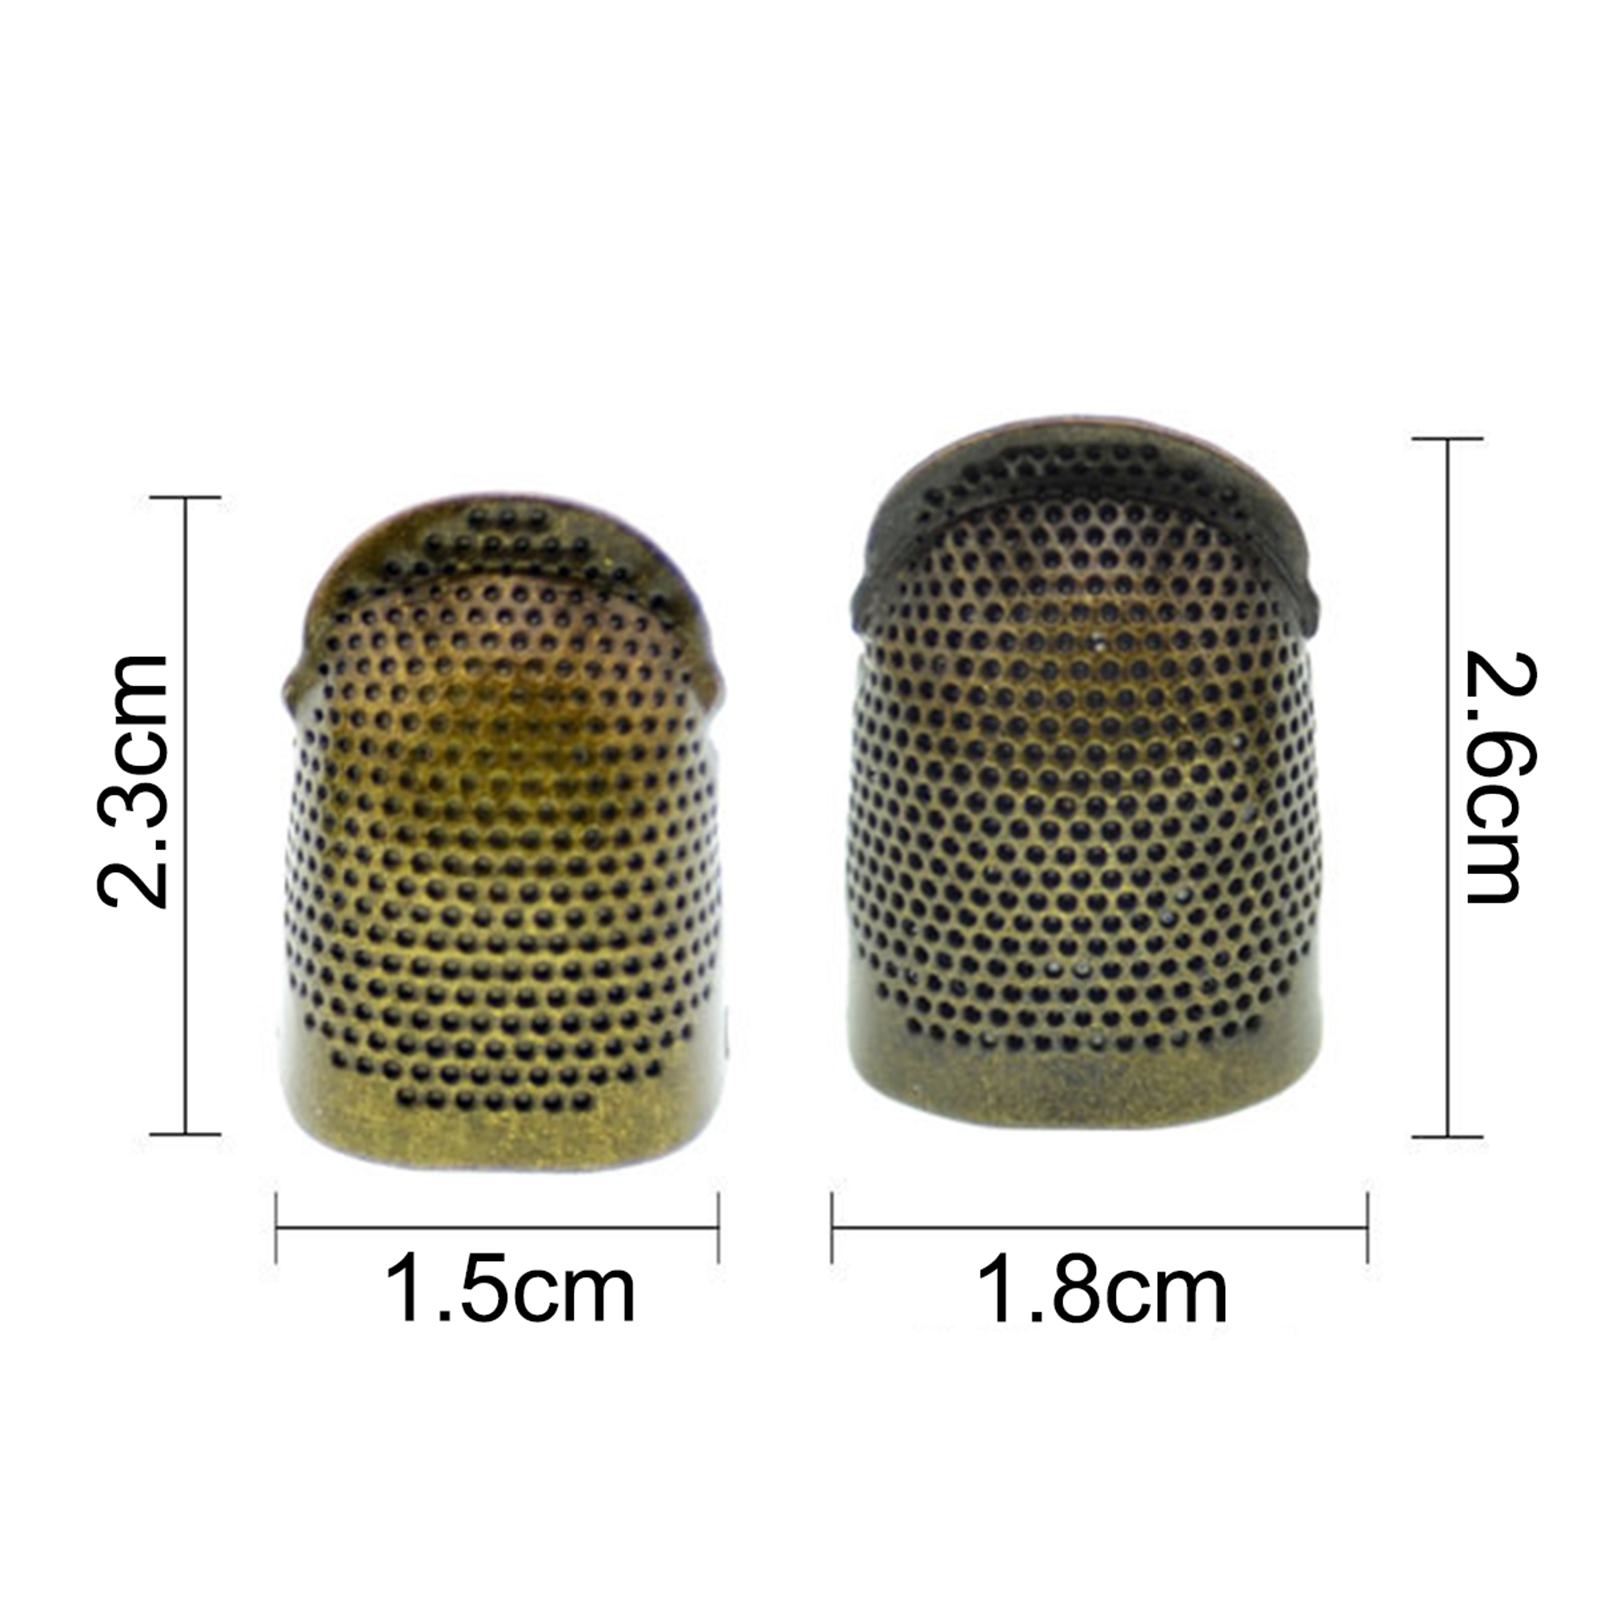 Hesroicy Sewing Thimble Adjustable Solid Anti-rust Sewing Thimble Finger Protector for Needlework - image 5 of 8